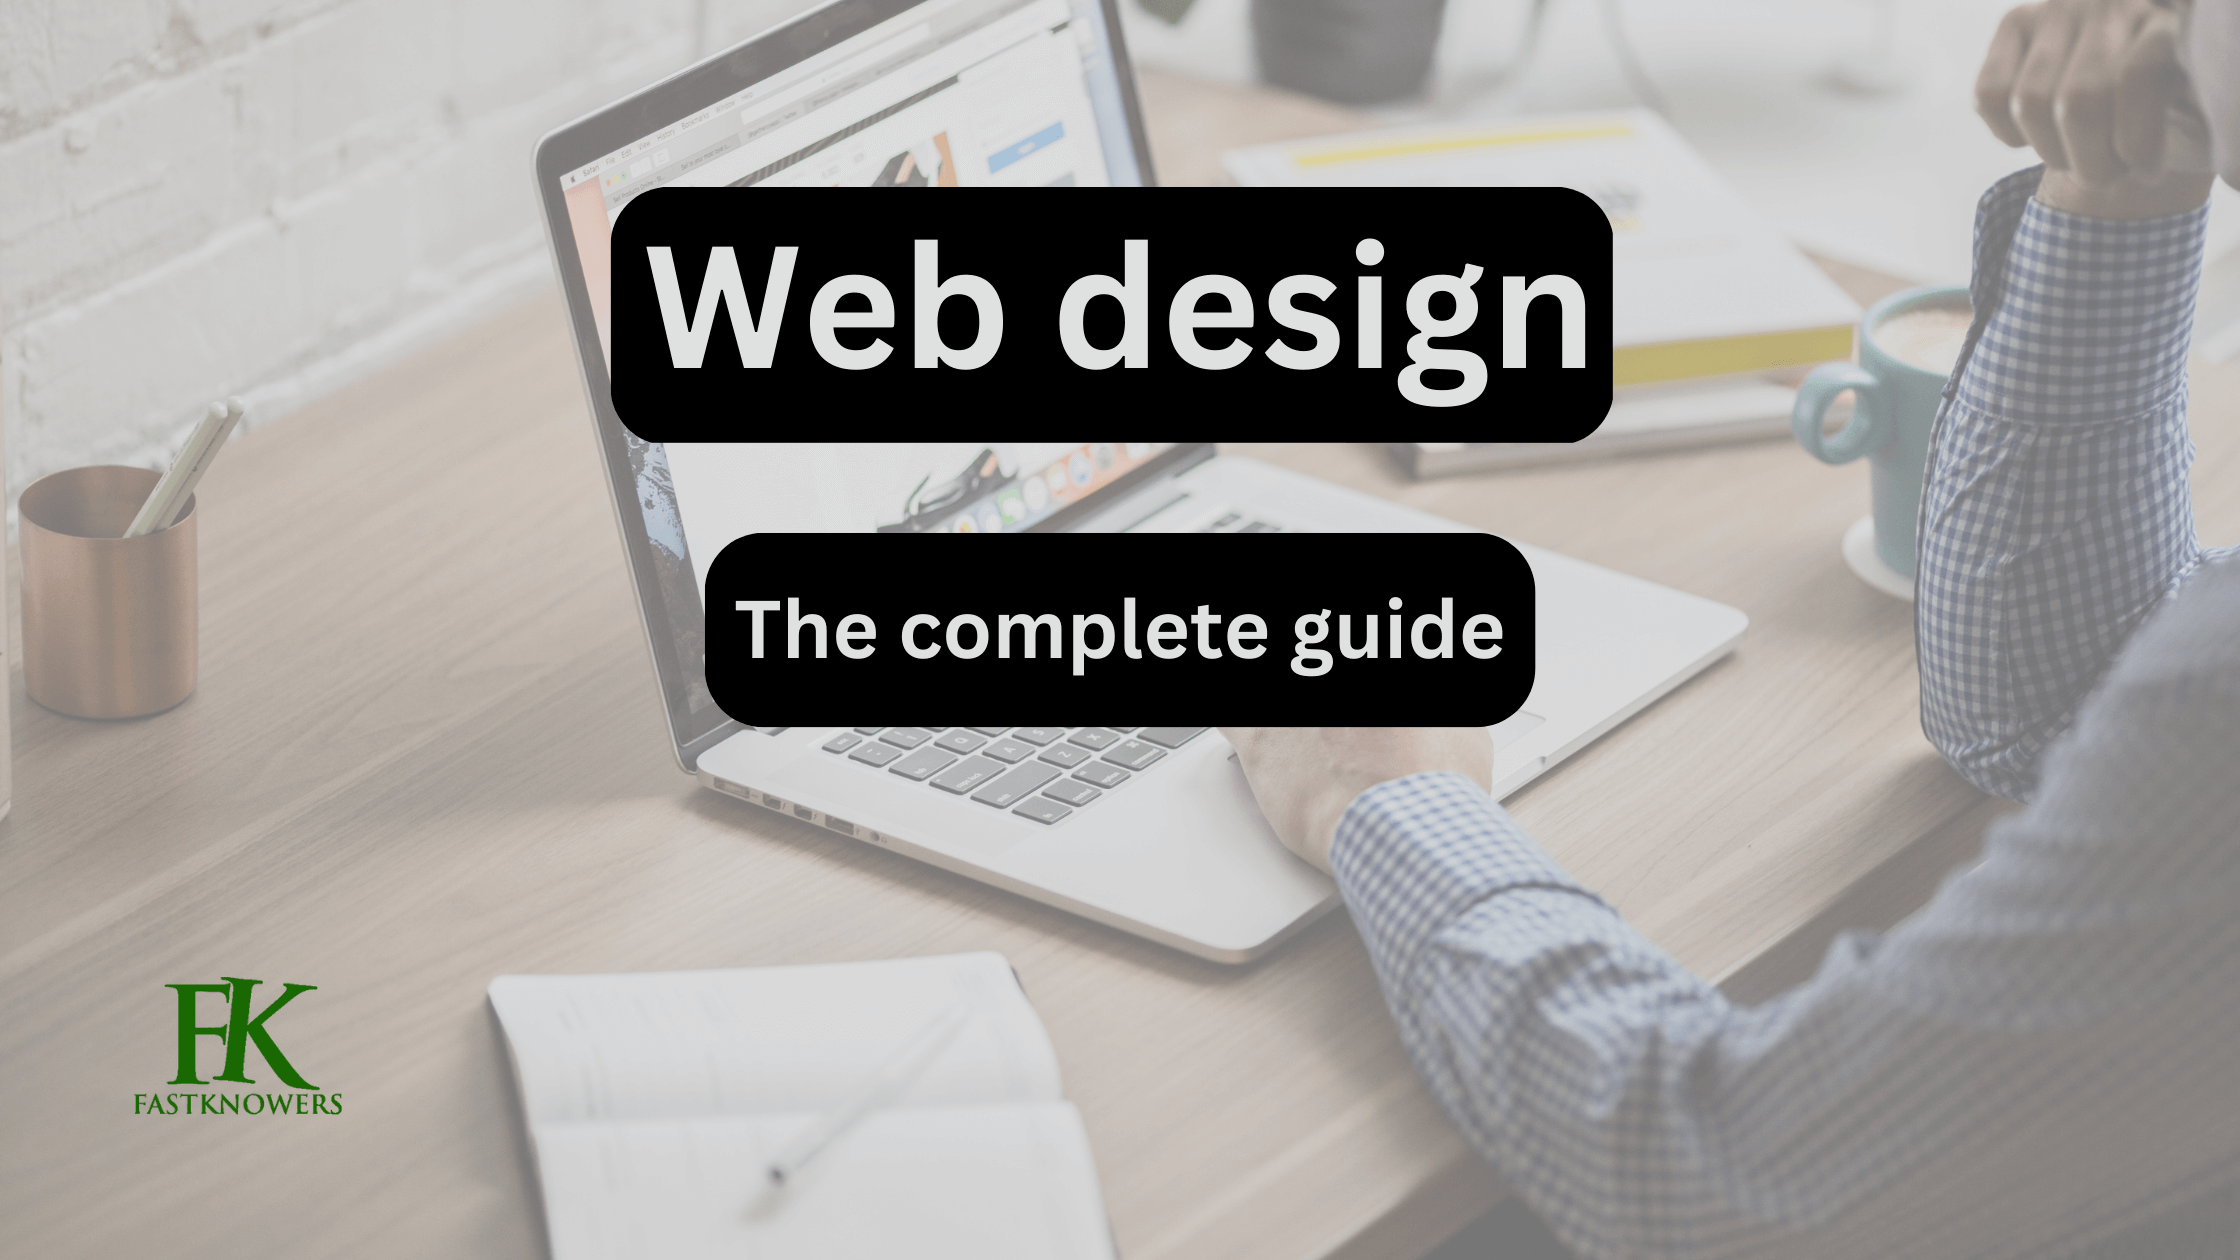 The complete guide to web design